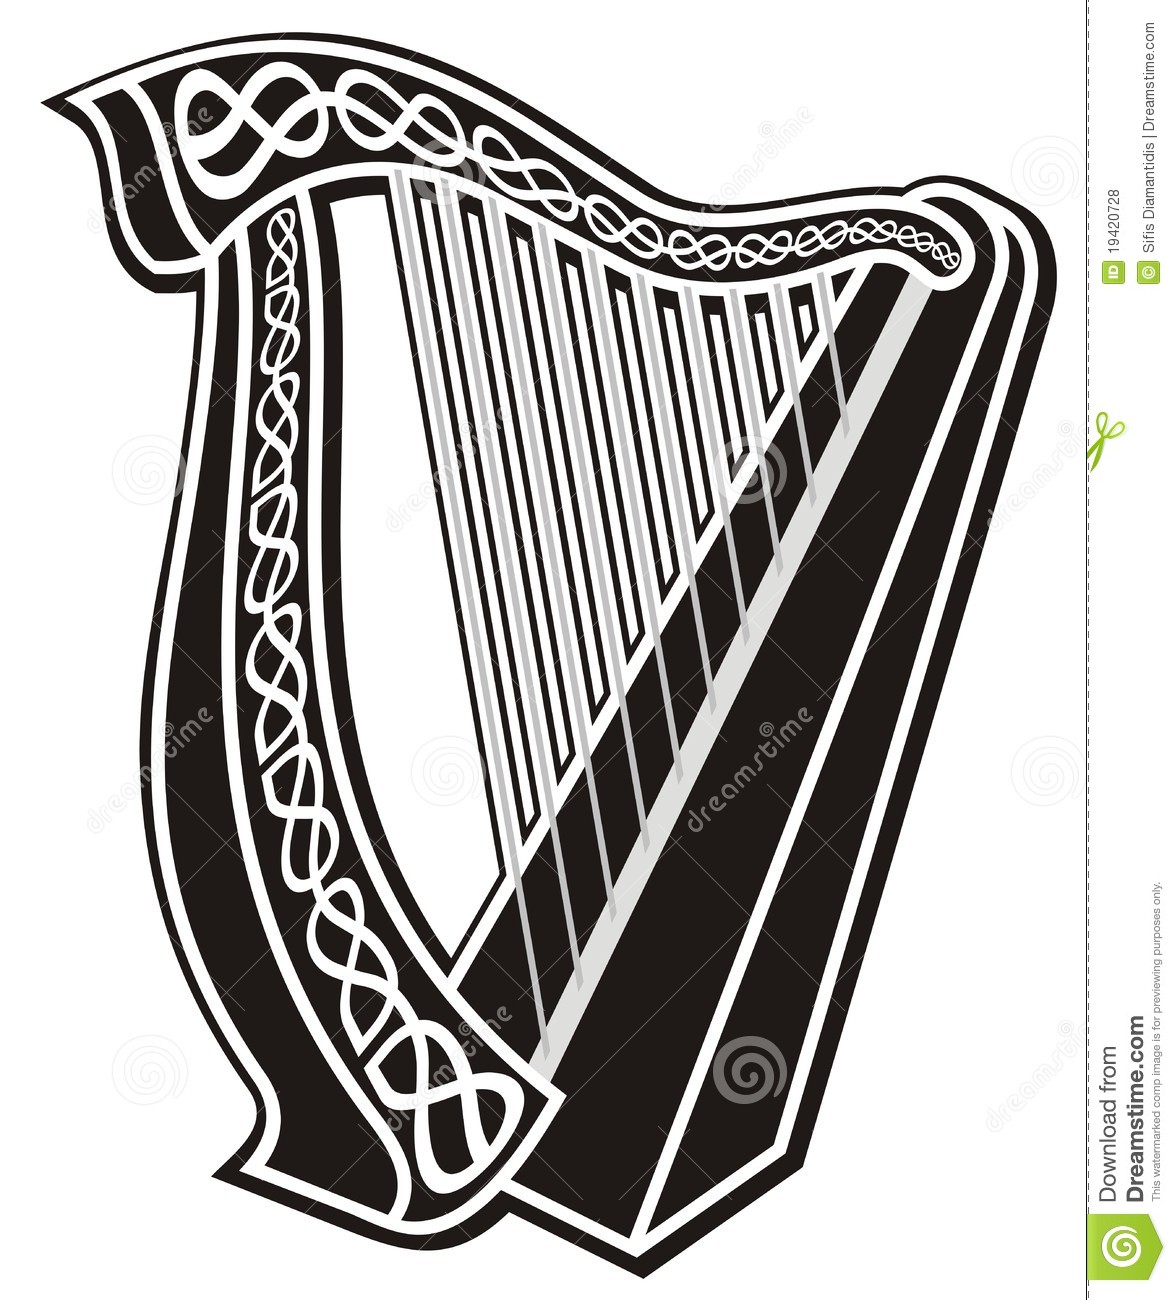 Black And White Harp Icon With Celtic Knot Decoration